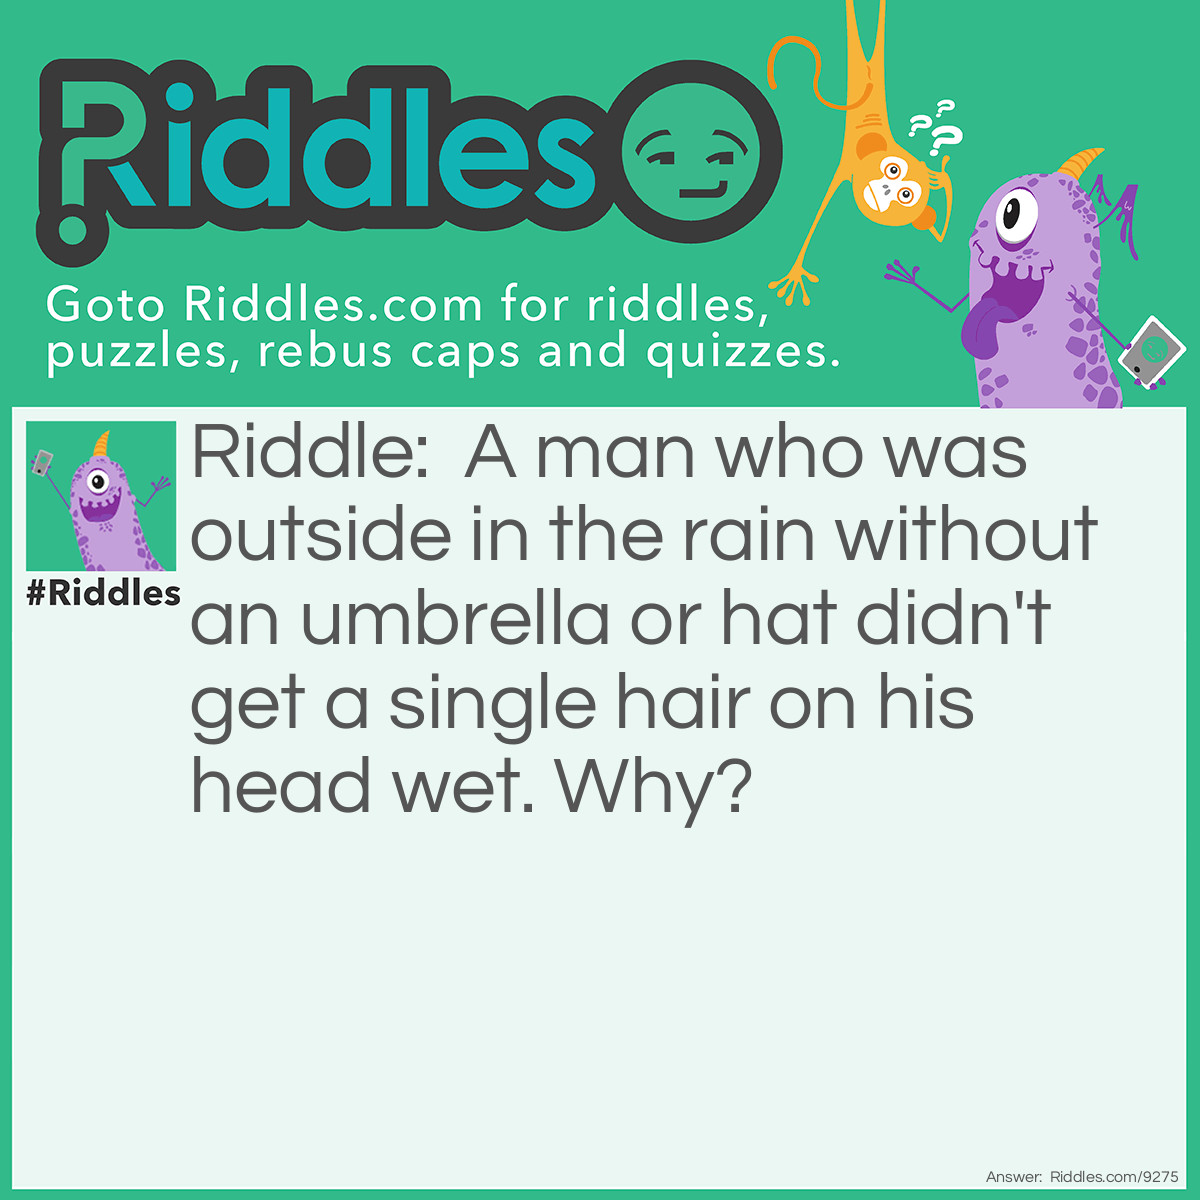 Riddle: A man who was outside in the rain without an umbrella or hat didn't get a single hair on his head wet. Why? Answer: He is Bald.